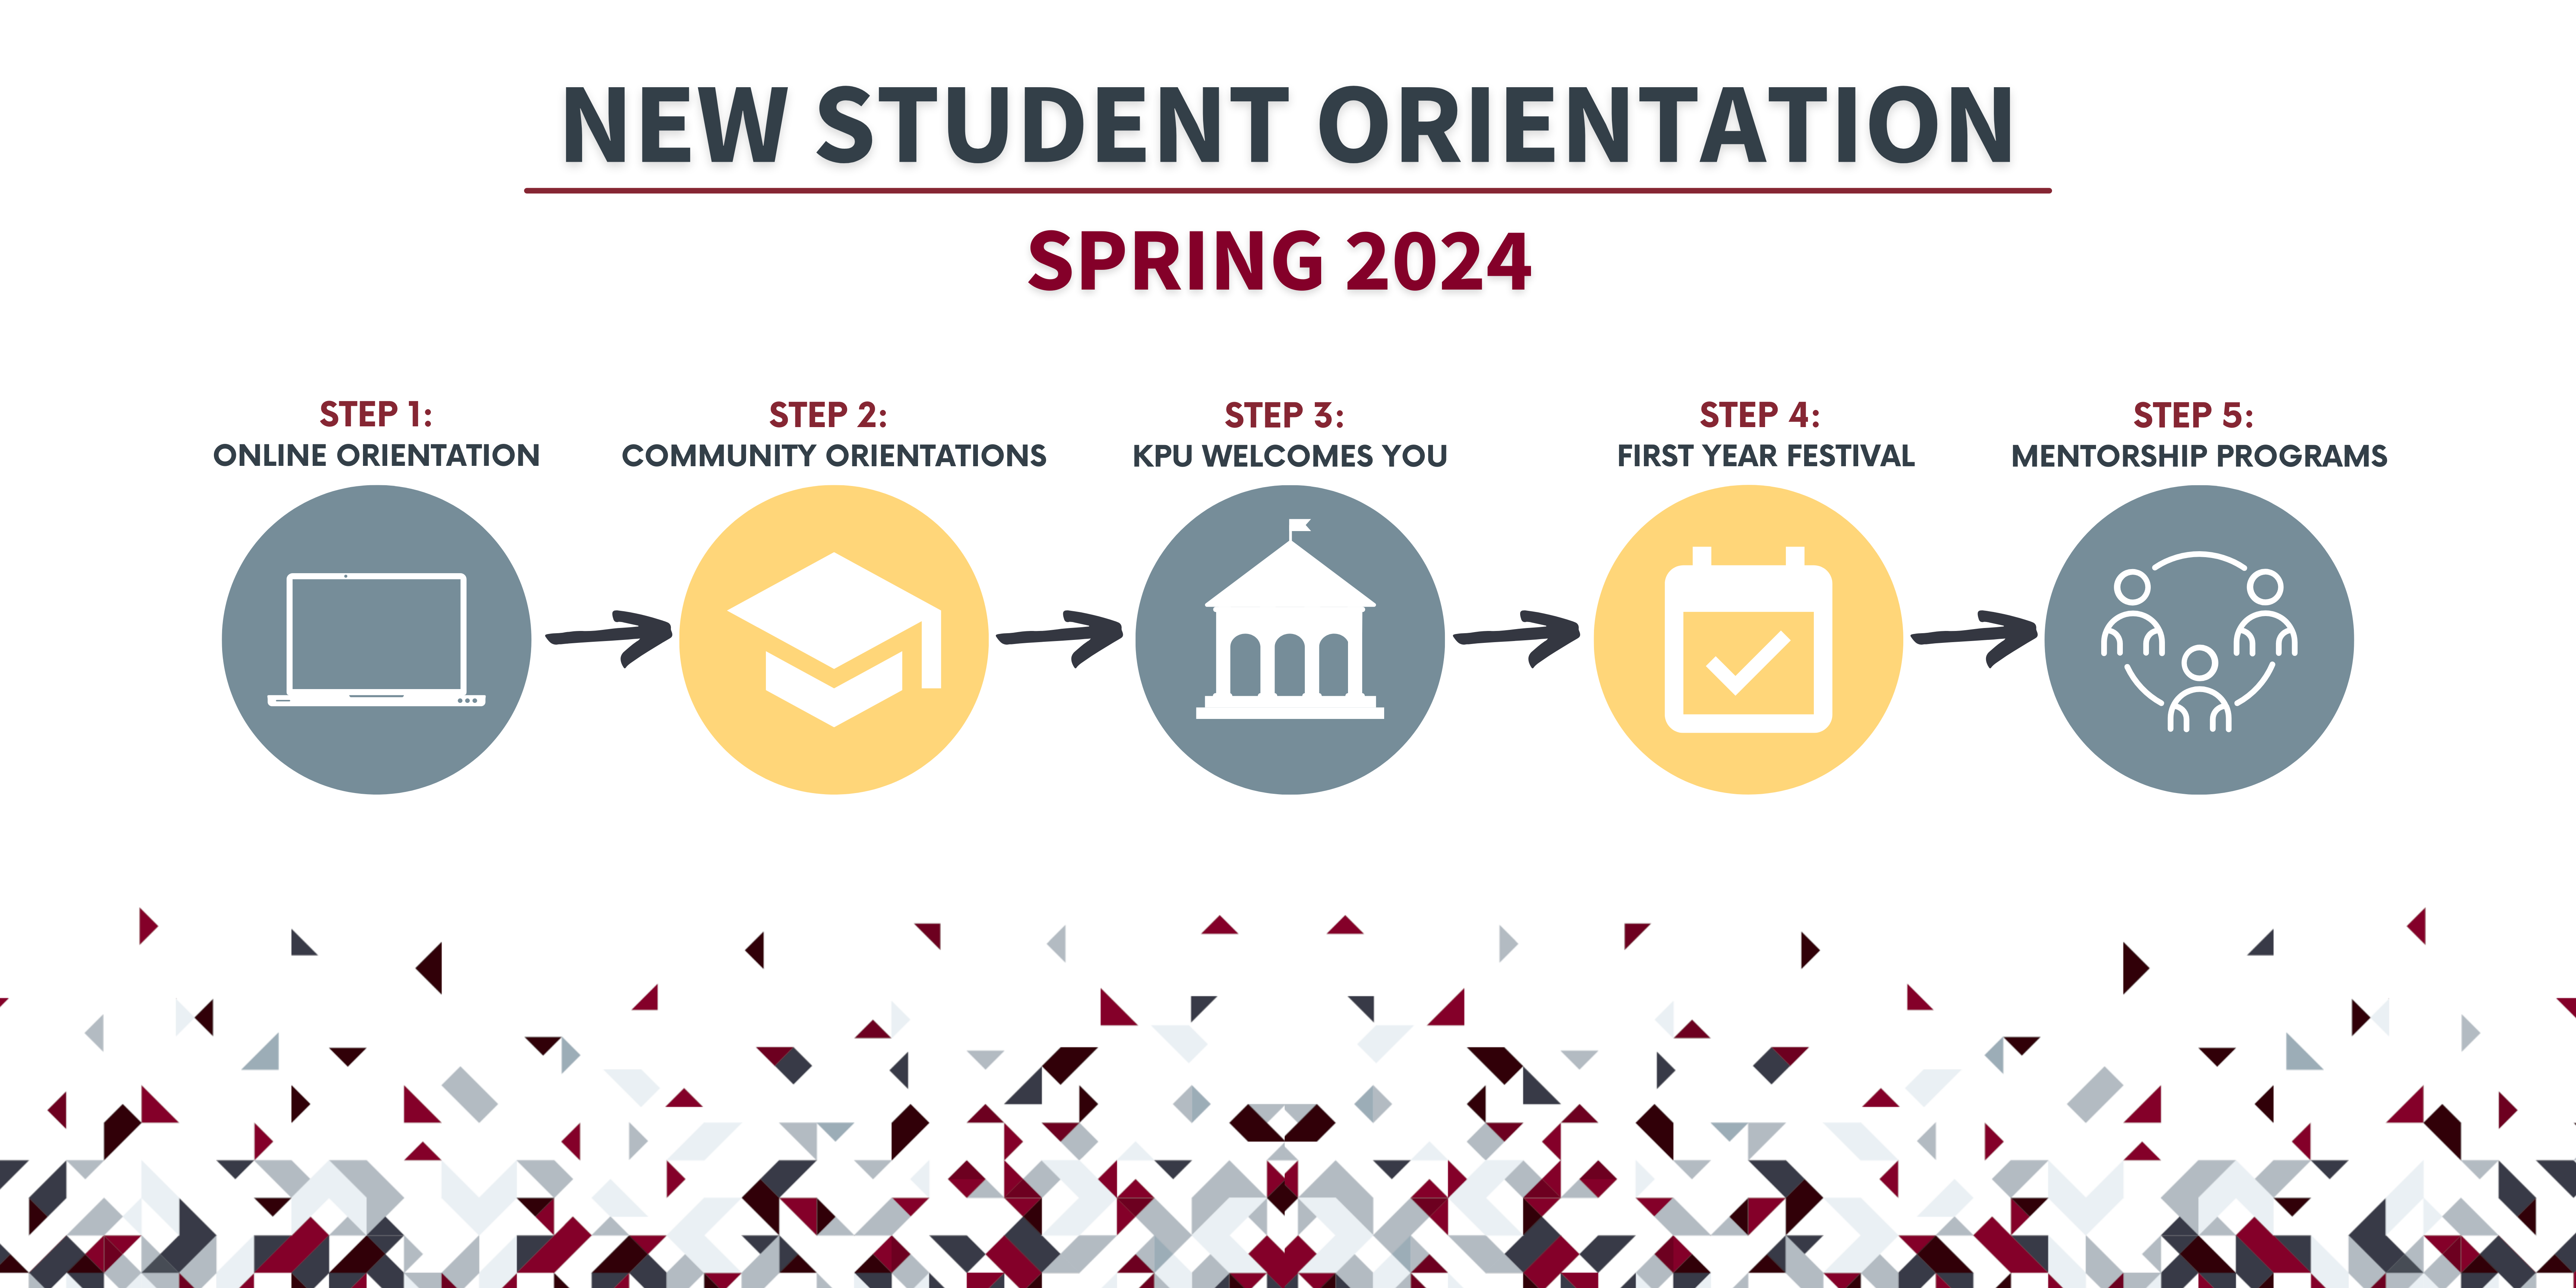 Next Steps for Students in Spring 2024